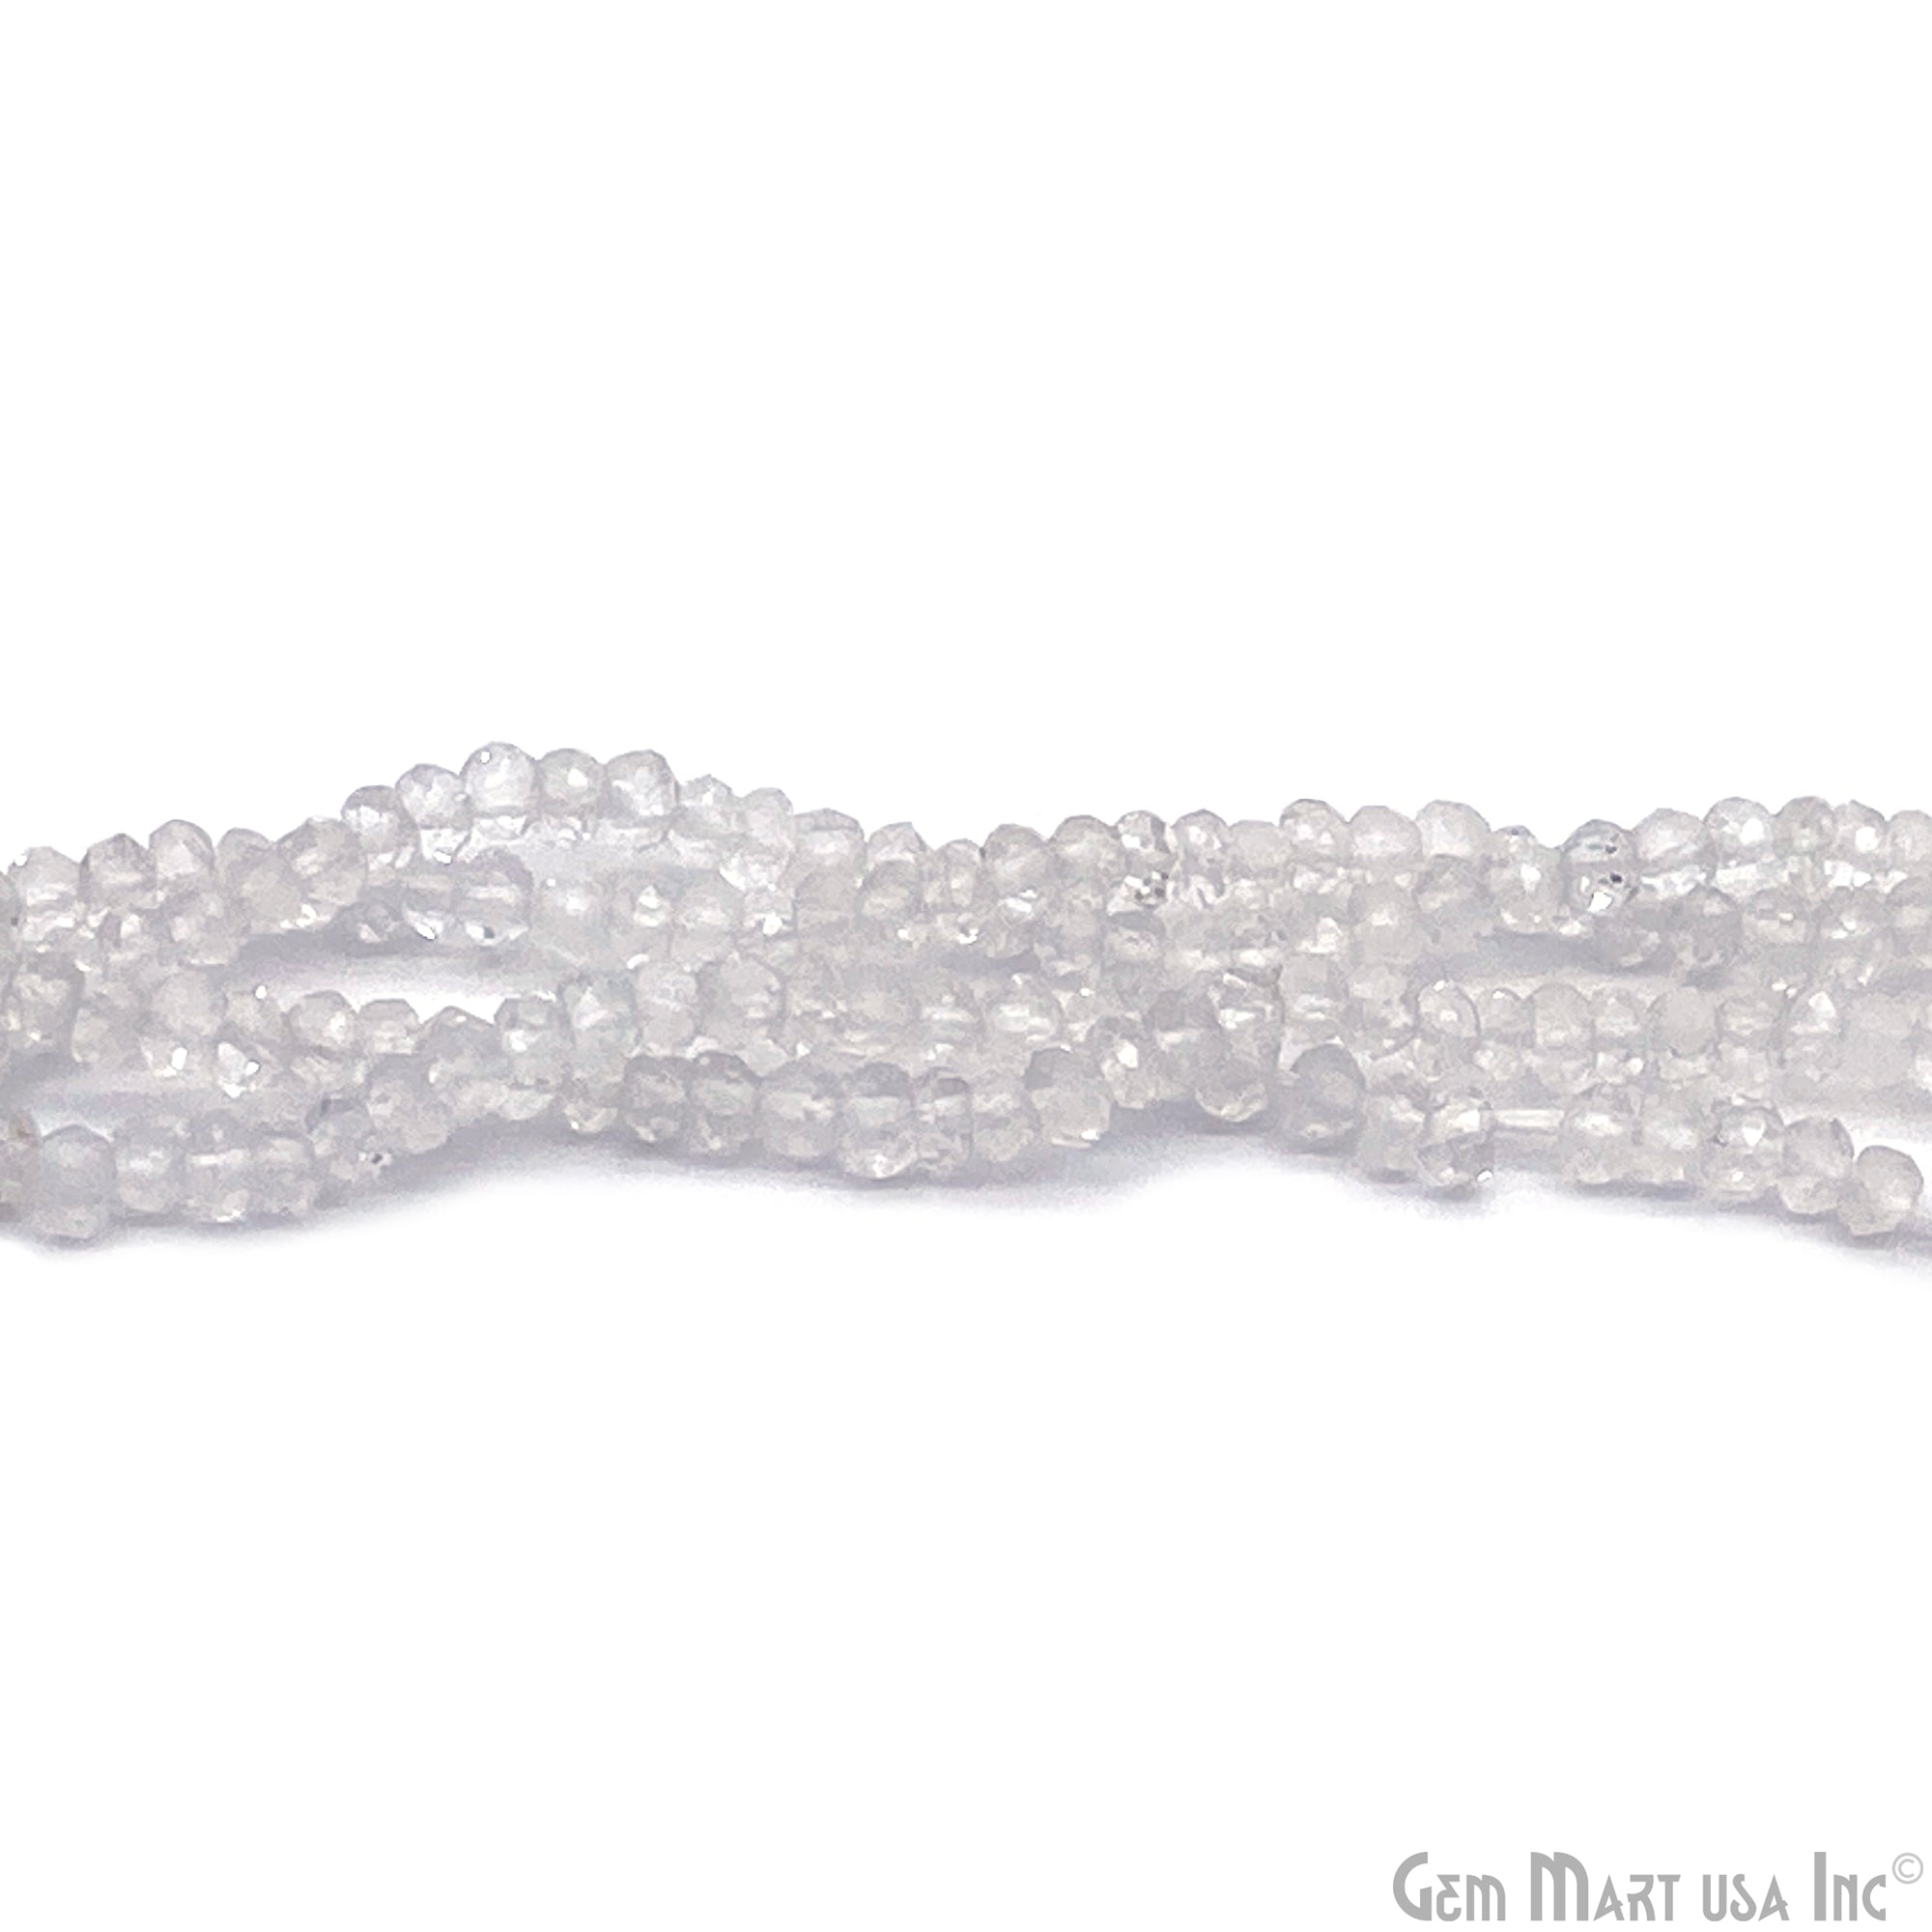 Crystal Round Faceted 3mm Gemstone Rondelle Beads 1 Strand